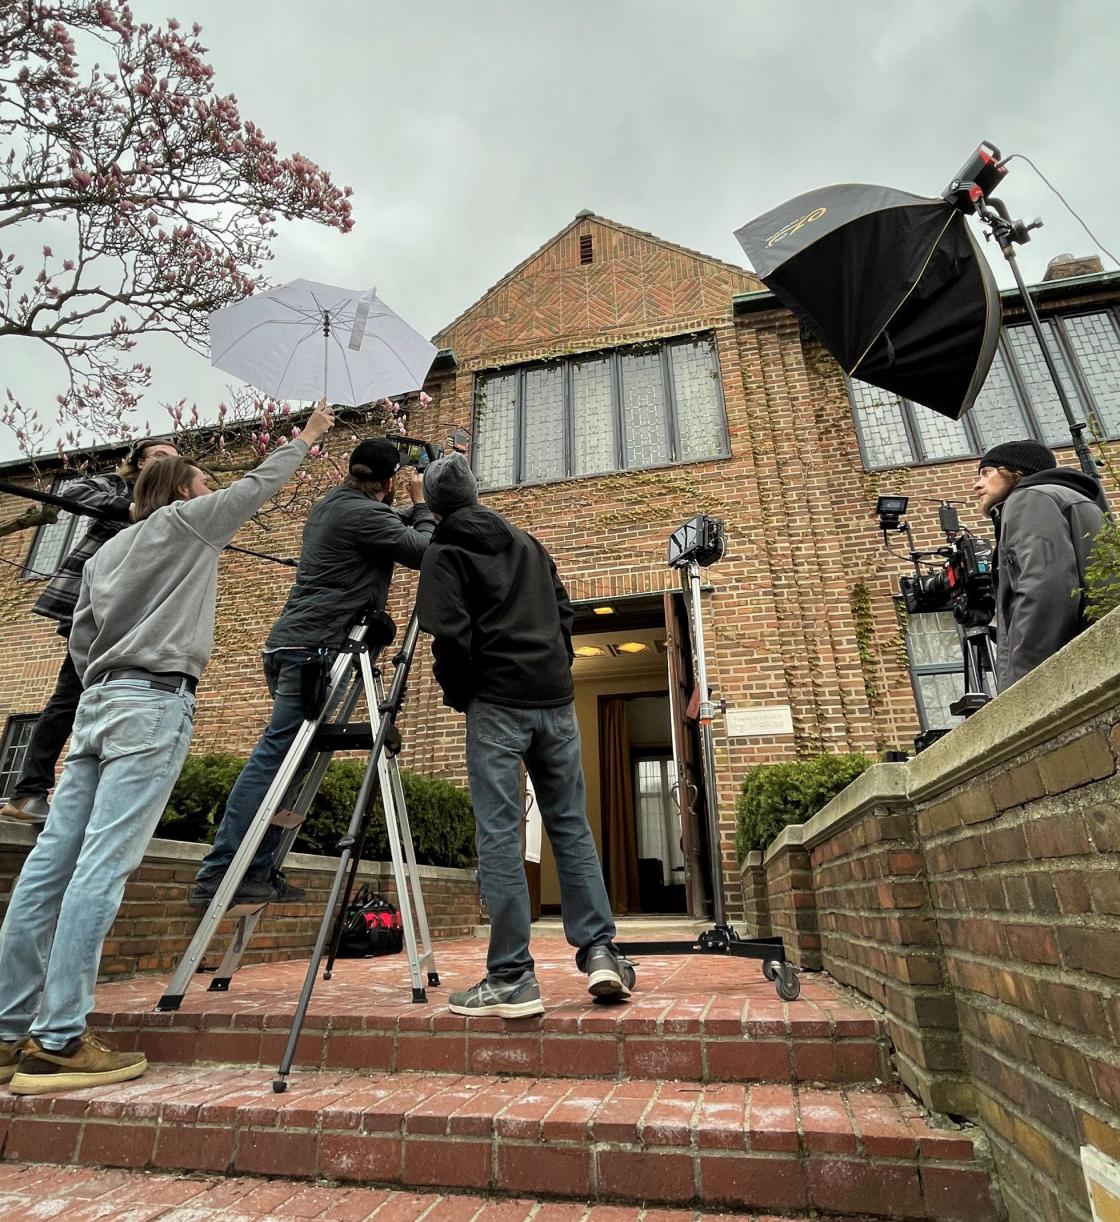 Photograph of the production crew preparing to film outside Saarinen House